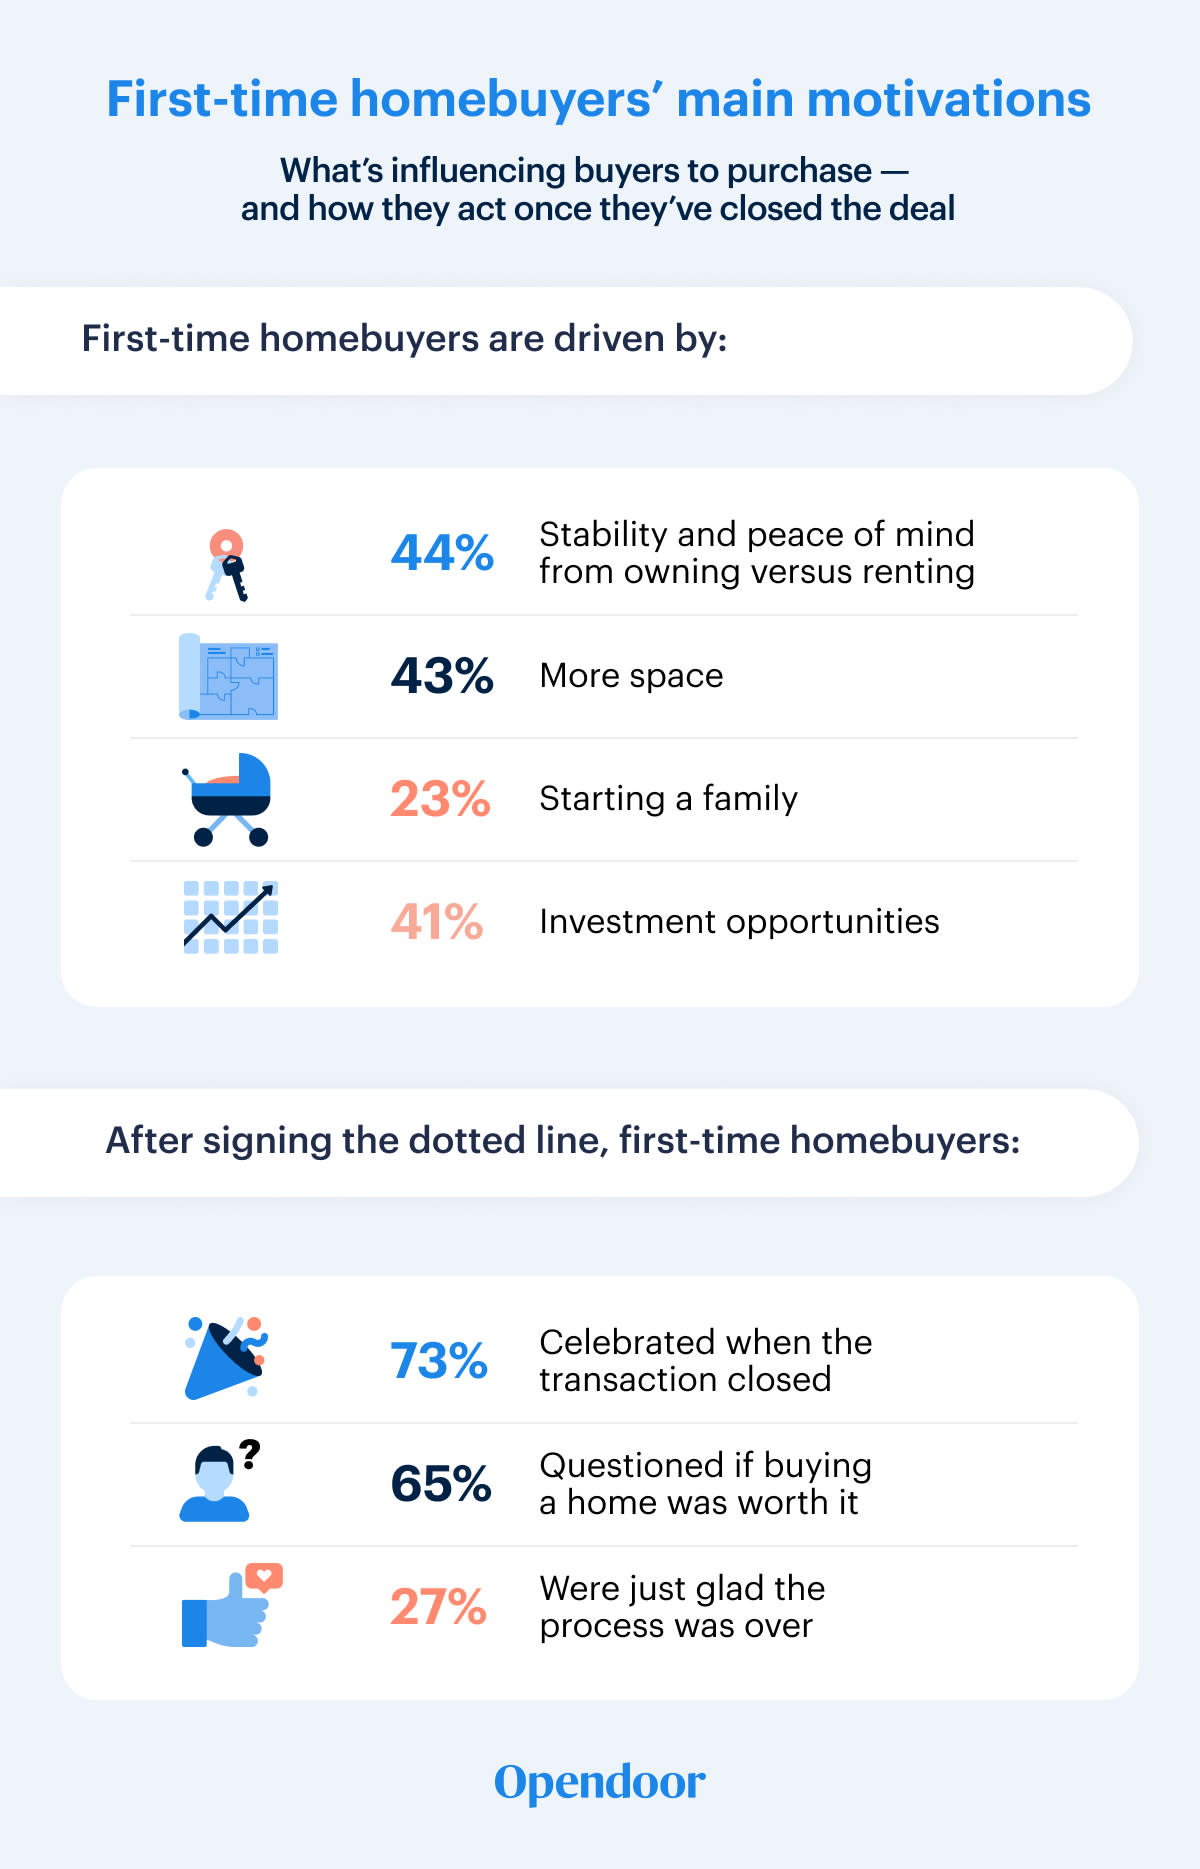 What's driving first-time home shoppers to make the purchase.